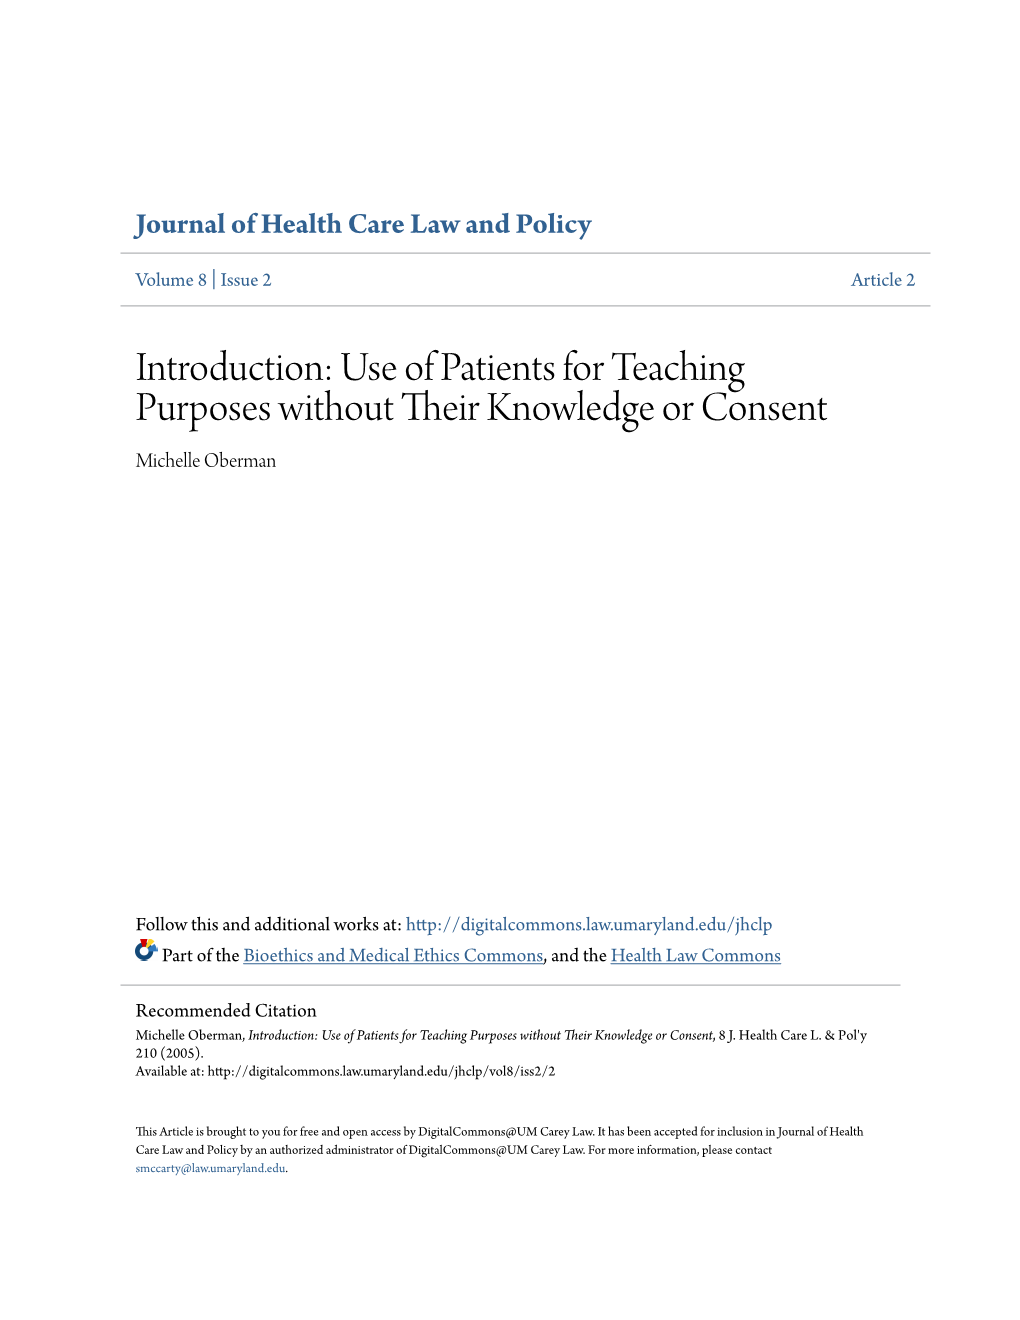 Use of Patients for Teaching Purposes Without Their Knowledge Or Consent Michelle Oberman